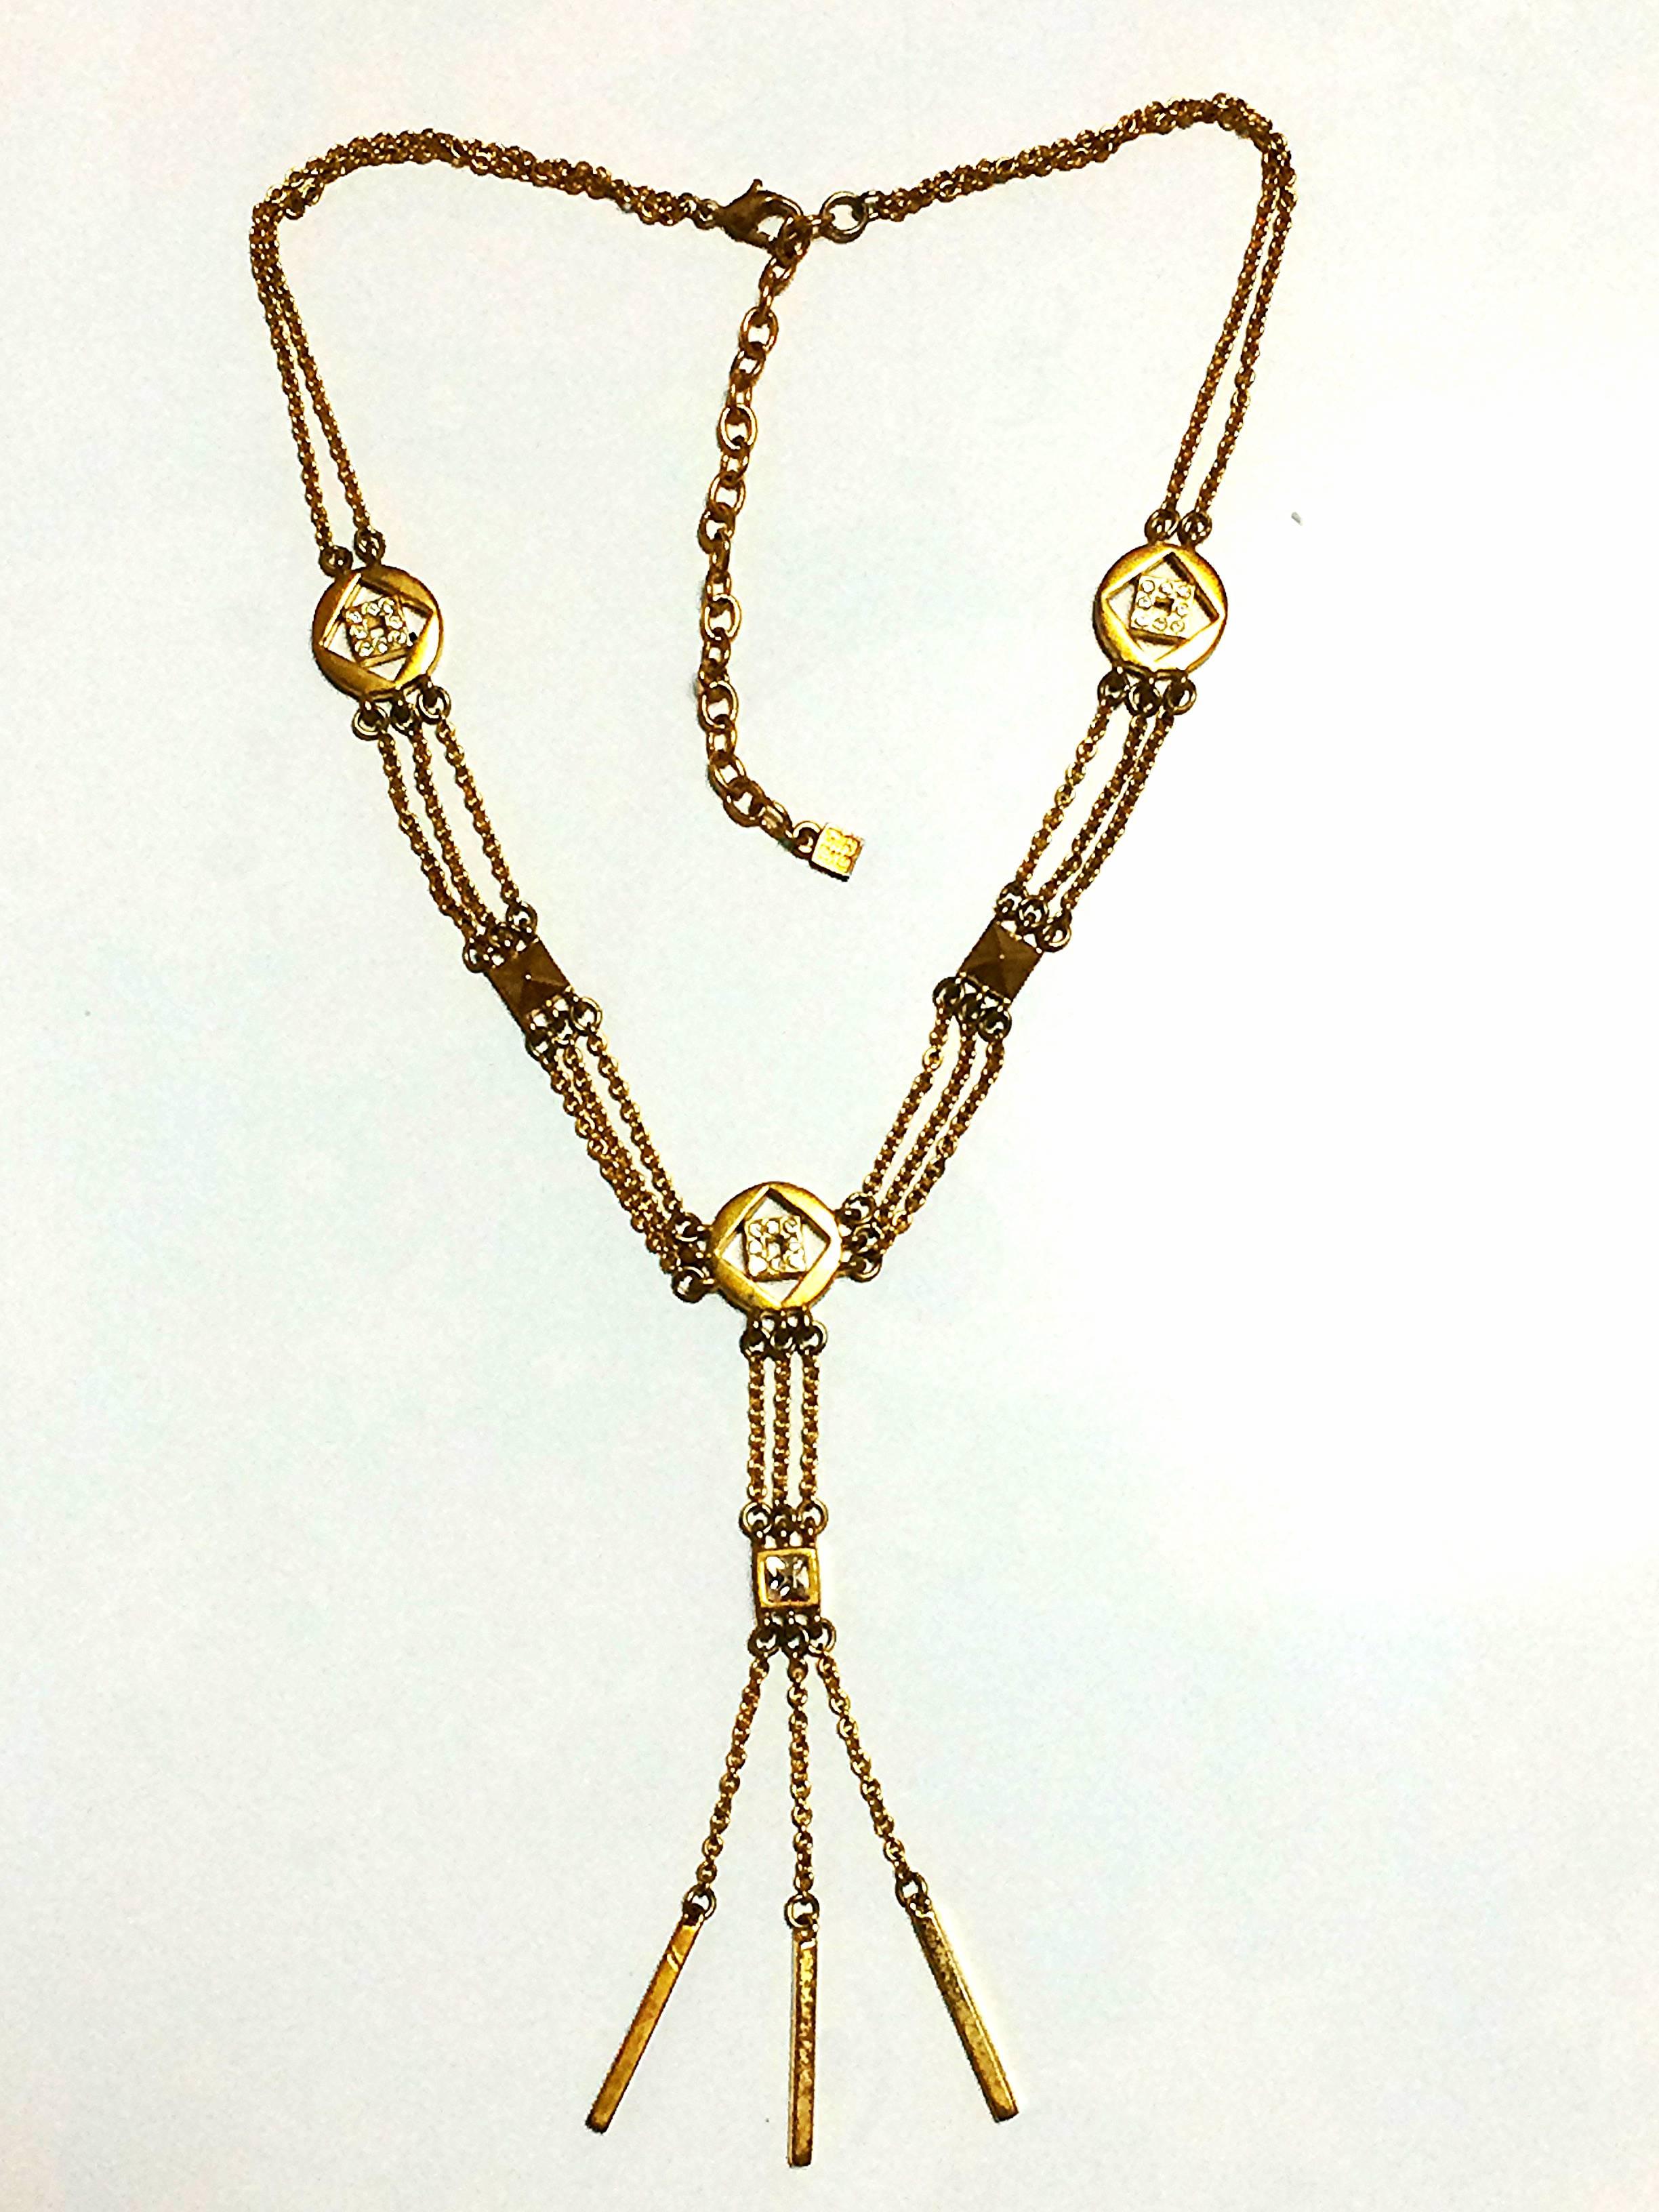 1990s. Vintage Givenchy three layer gold chain long necklace with rhinestone crystal logo charms. Statement necklace back in the era. Audrey Hepburn.

Another FAB and stunning jewelry necklace from GIVENCHY back in 90's.
Consisting of rhinestone